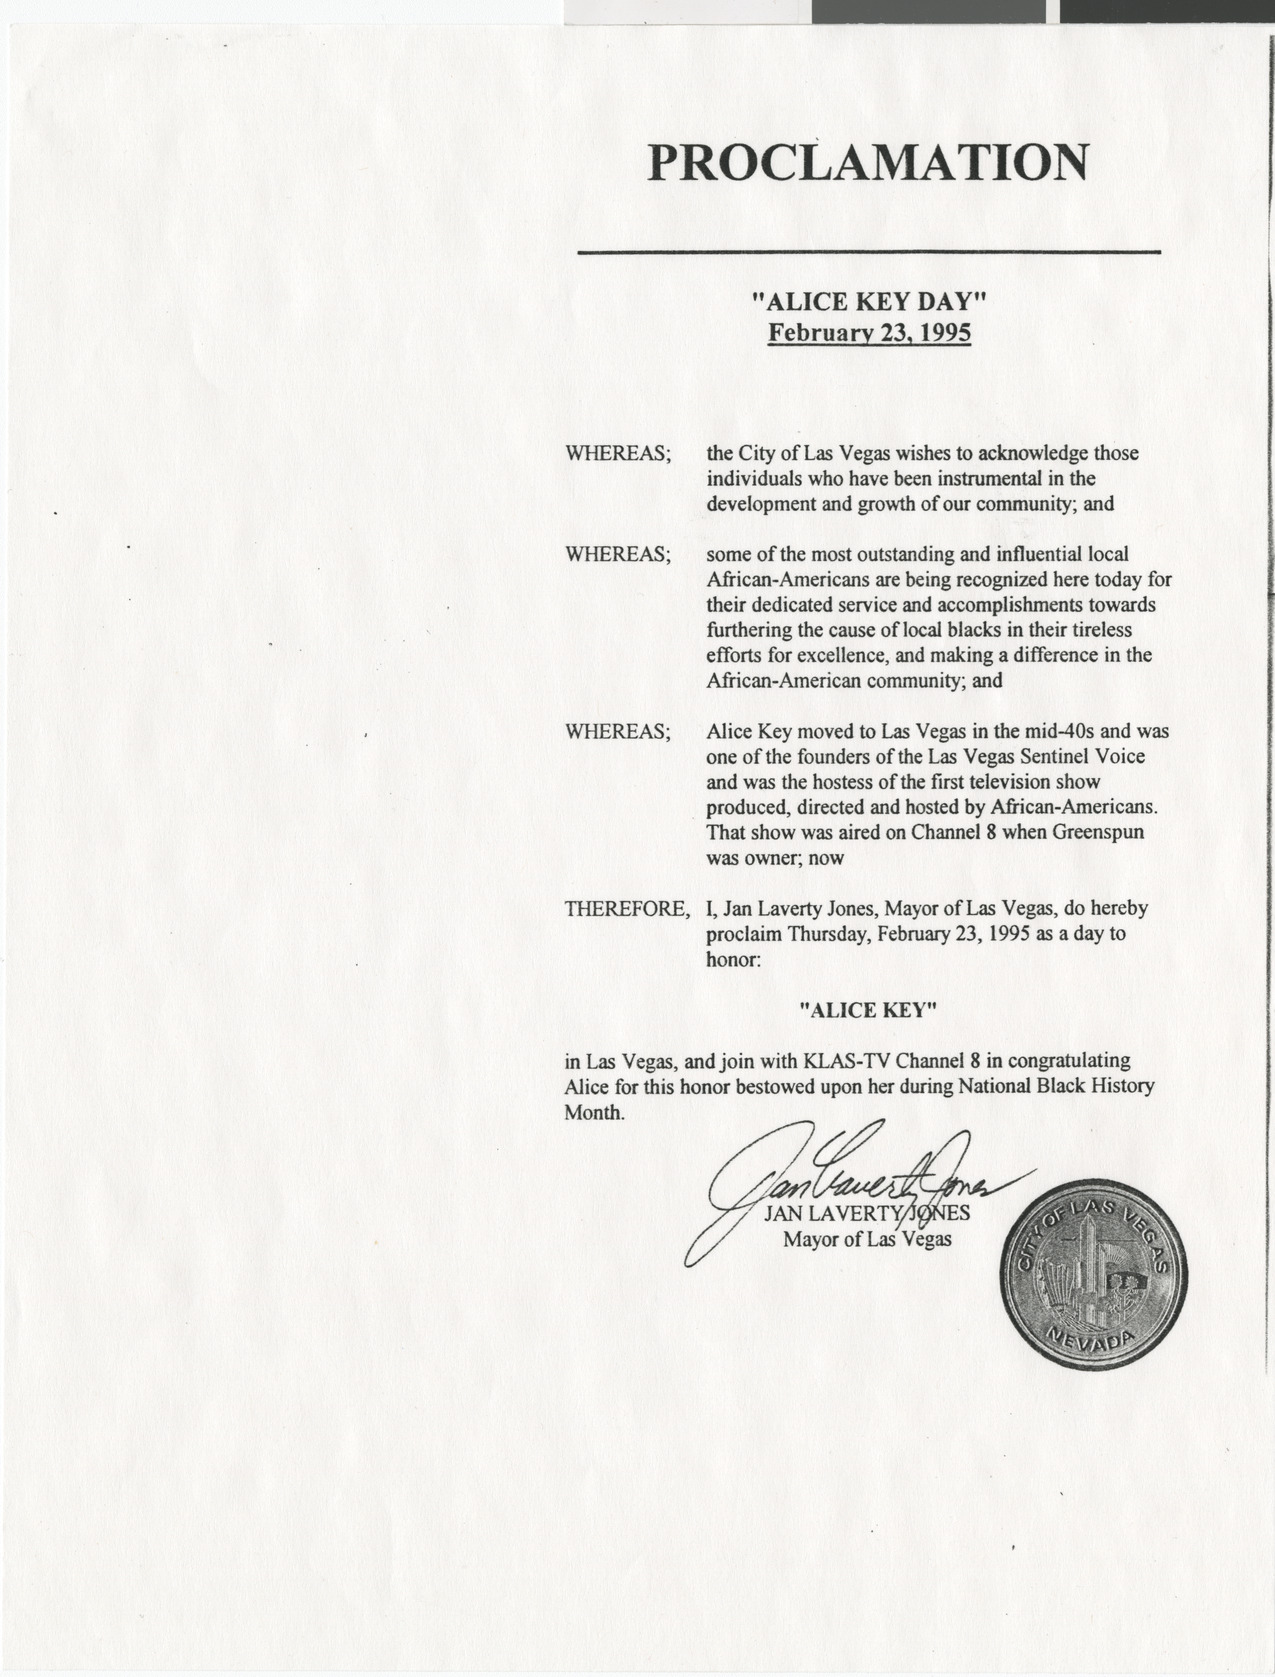 Proclamation by Mayor of Las Vegas for Alice Key Day, February 23, 1995 (see also Box 1 Folder 13)